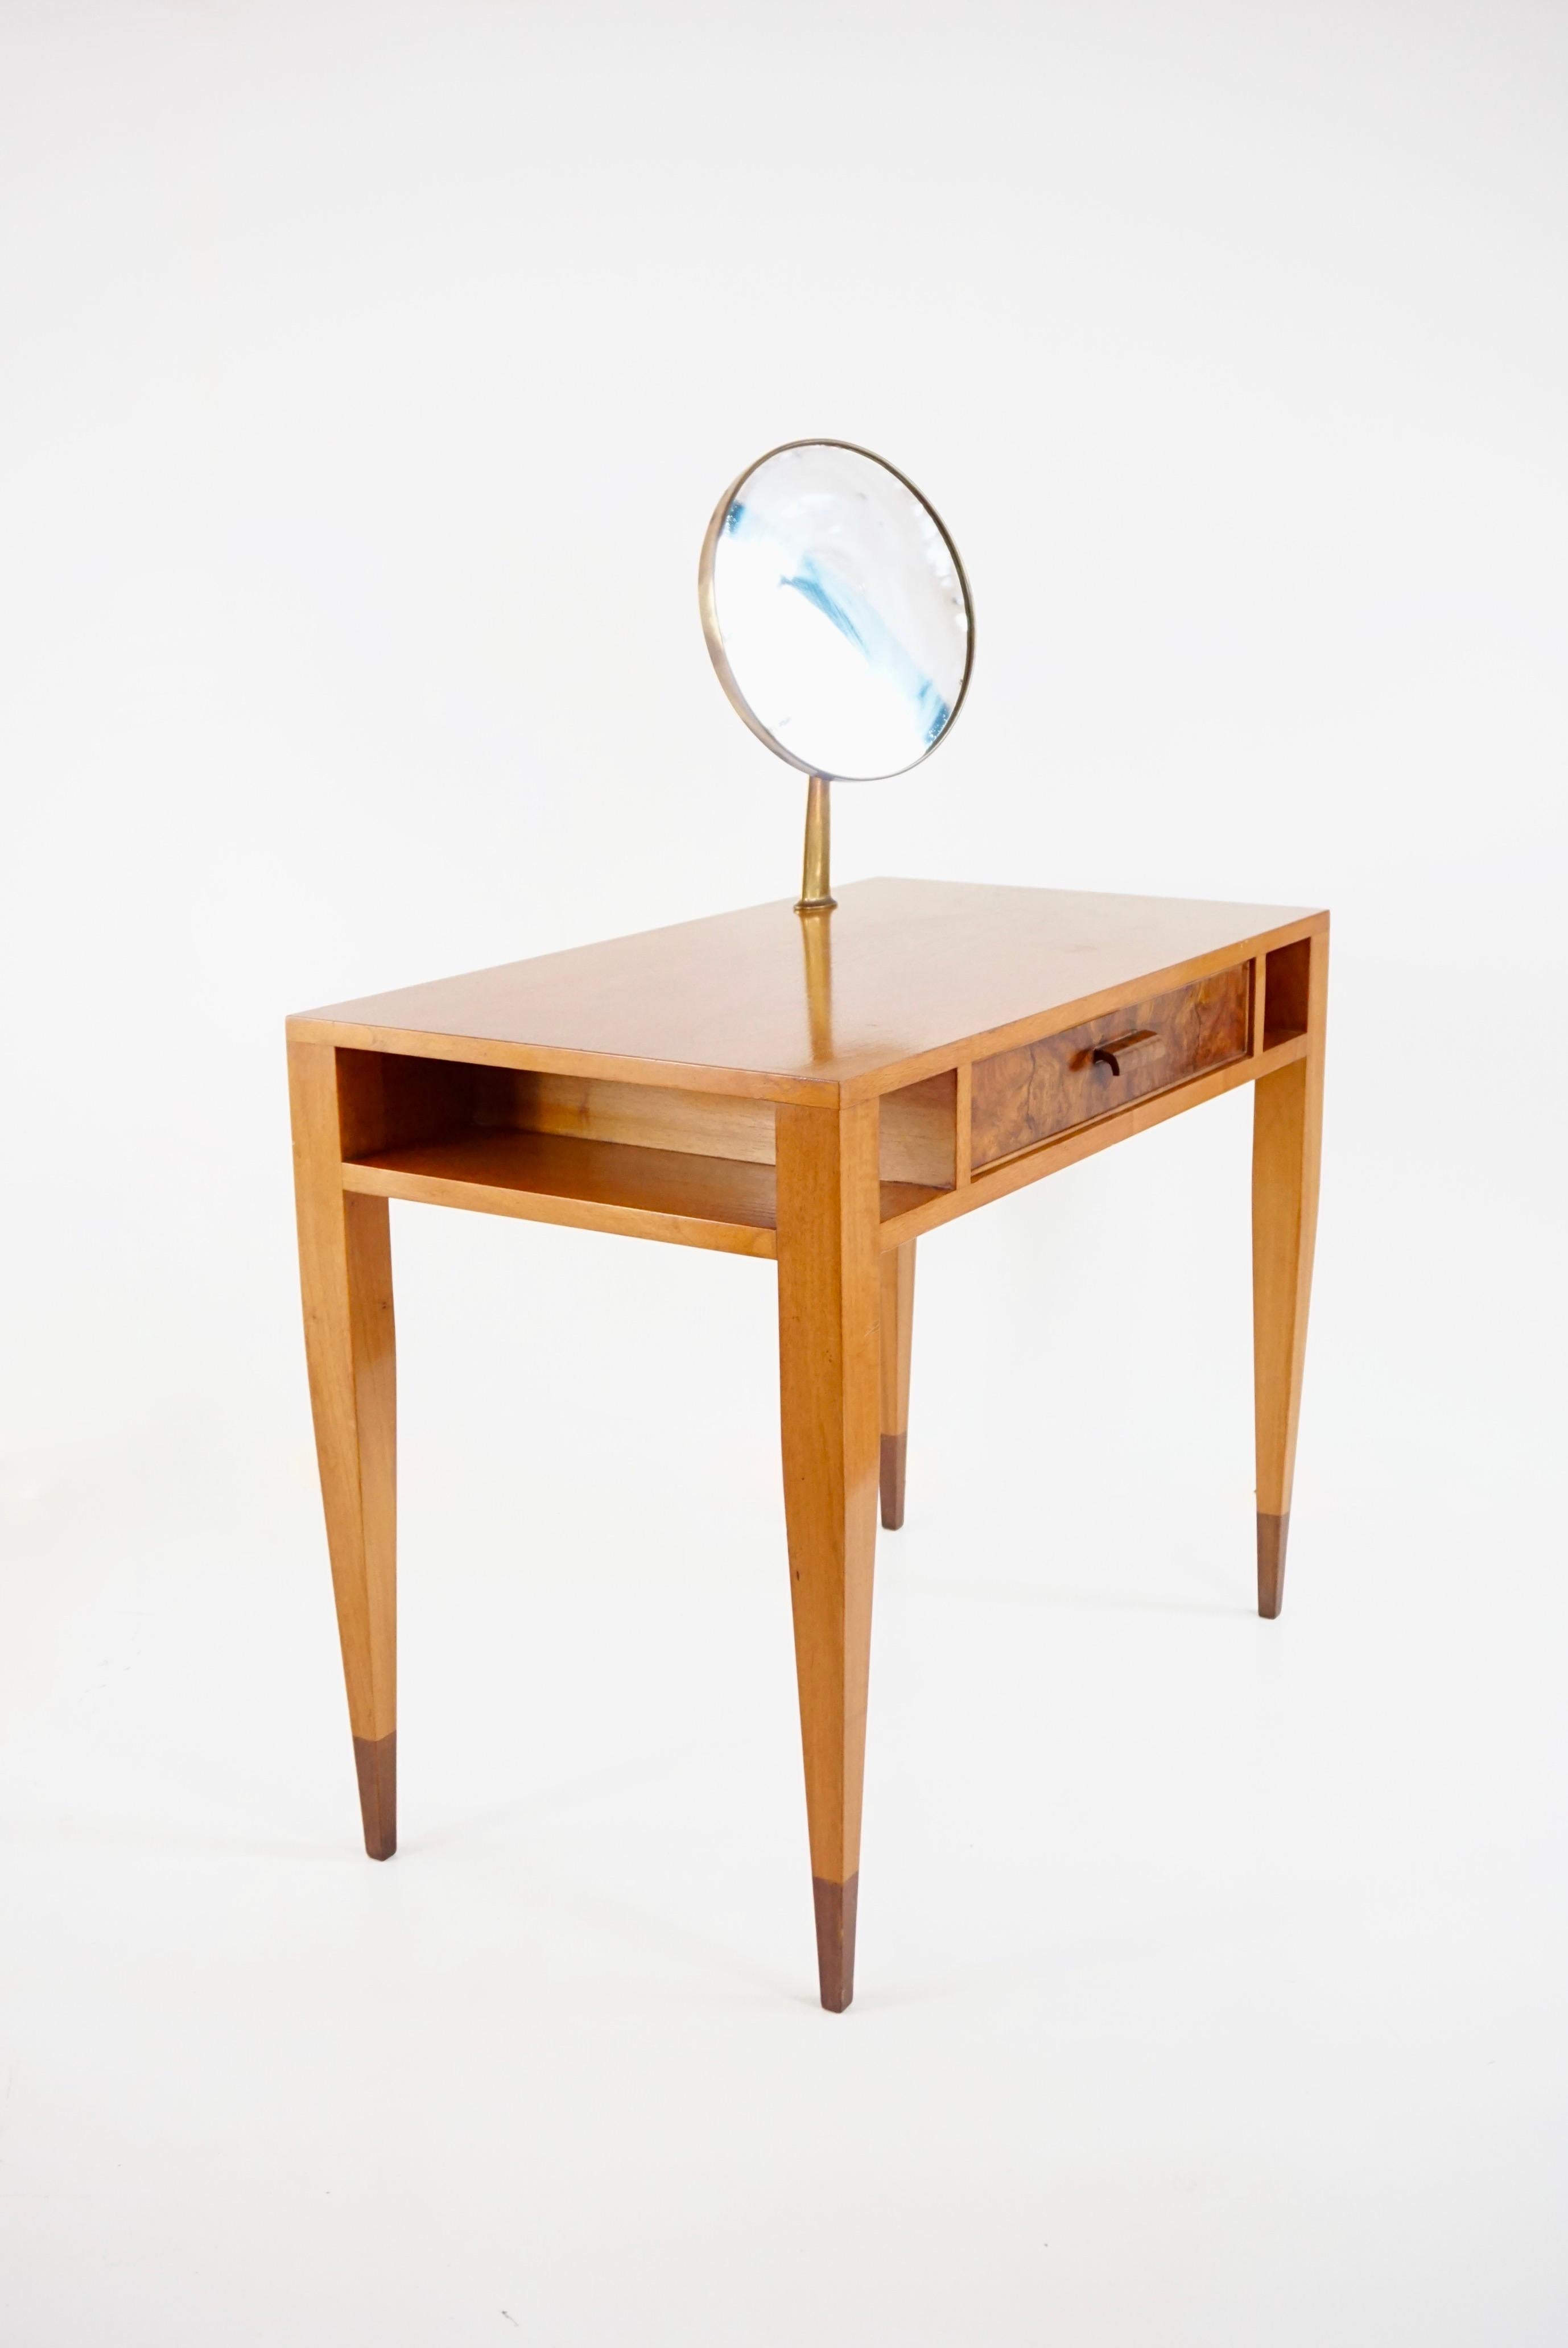 Mid-20th Century Gio Ponti vanity desk console table with a adjustable Fontana arte mirror, 1950 For Sale